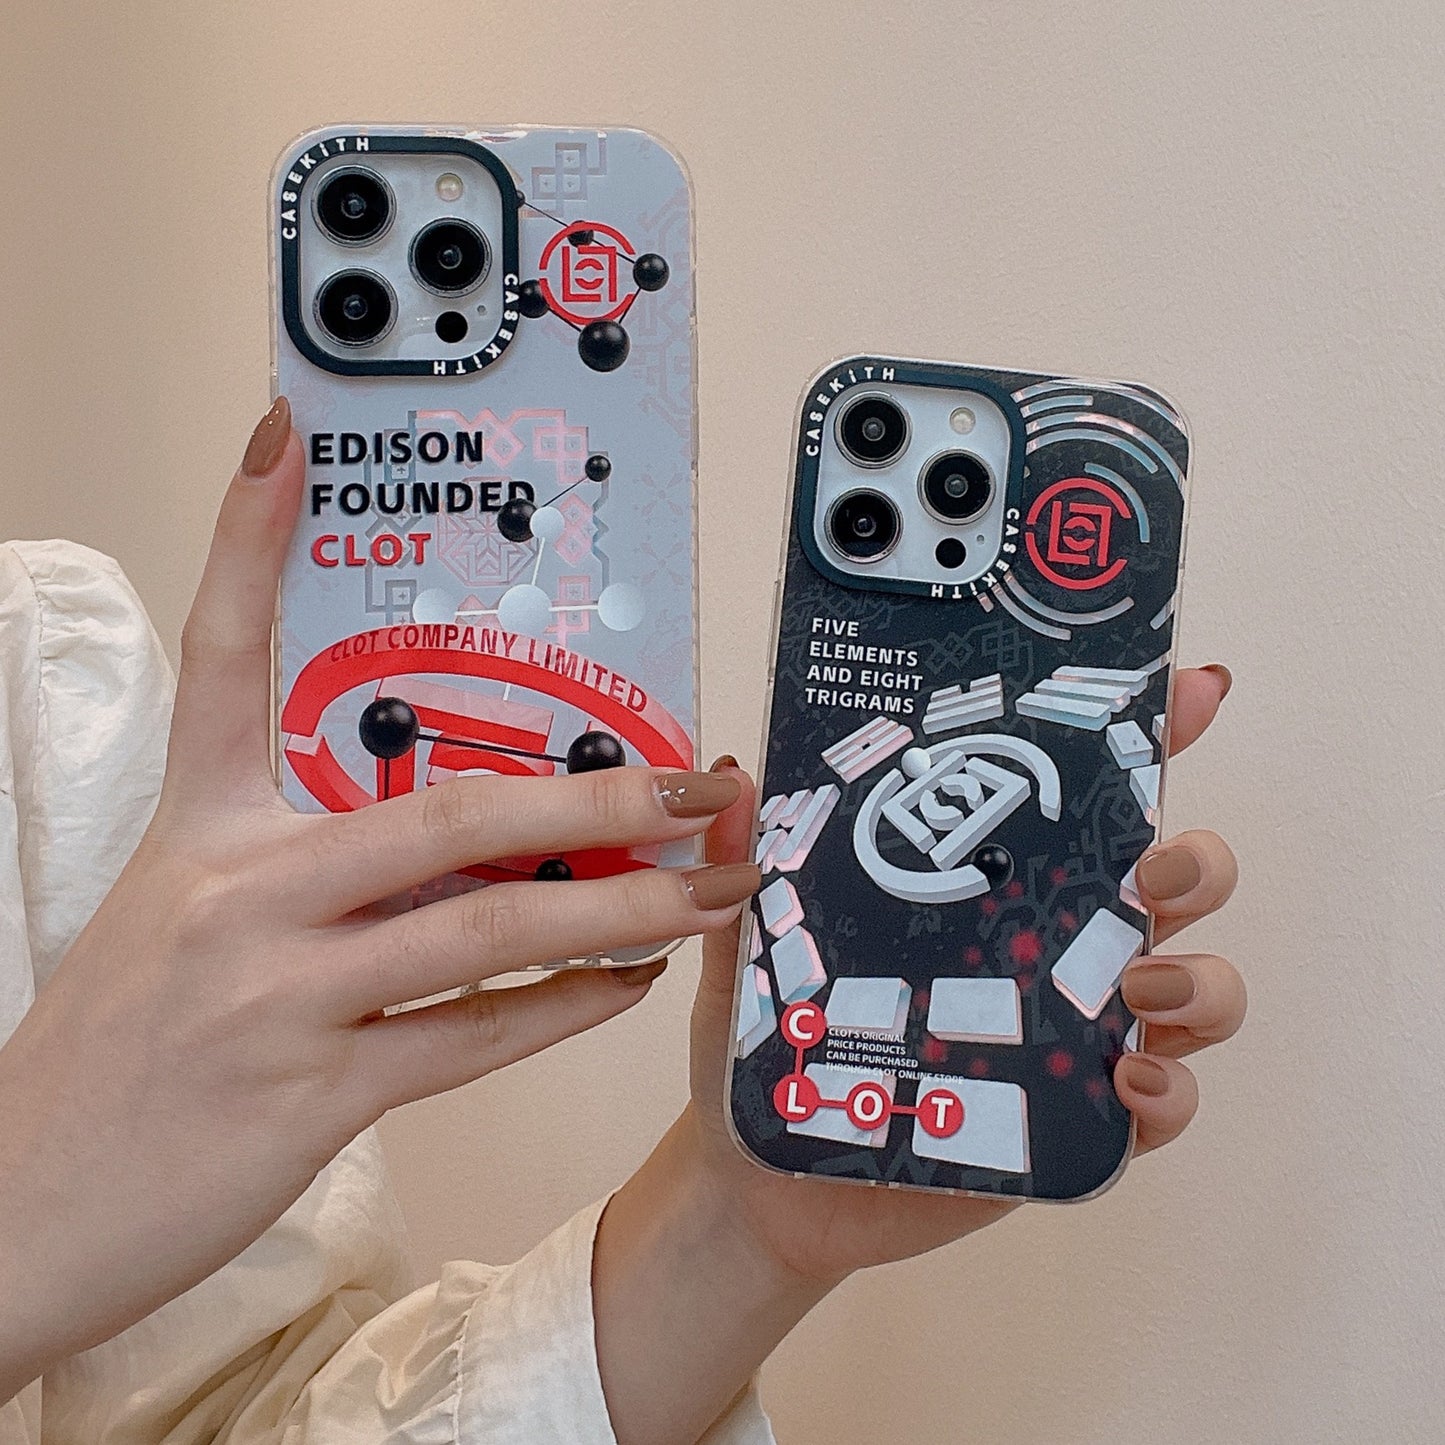 Style Meets Protection: Trendy C-Lot Phone Cases for Fashion-forward Devices